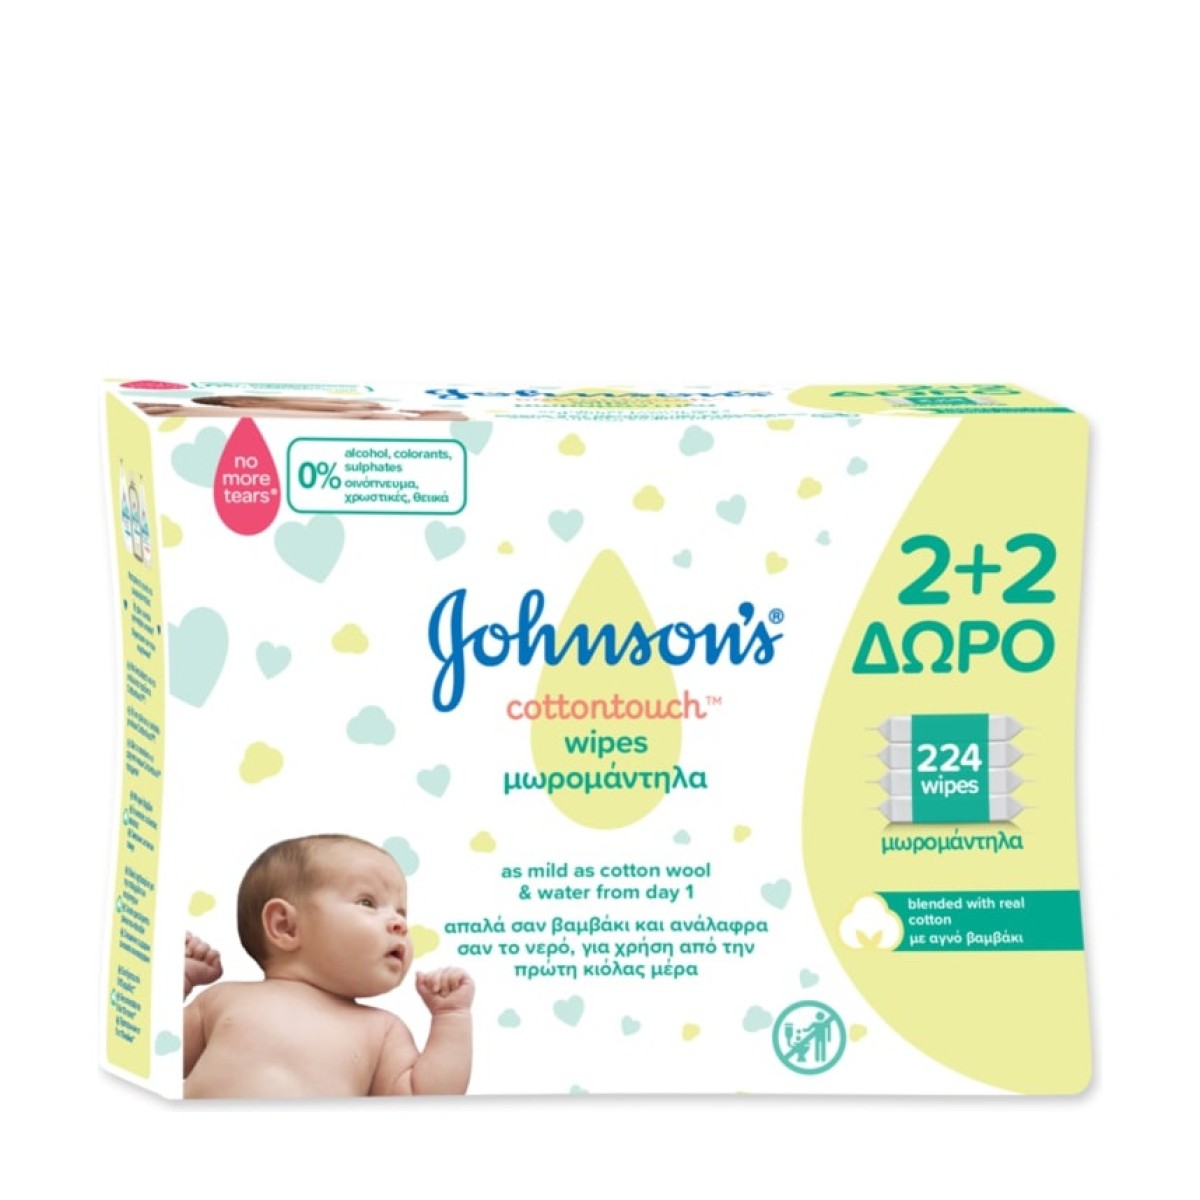 Johnson\'s | Cottontouch Wipes | Μωρομάντηλα | 224 τεμ (2+2 ΔΩΡΟ)